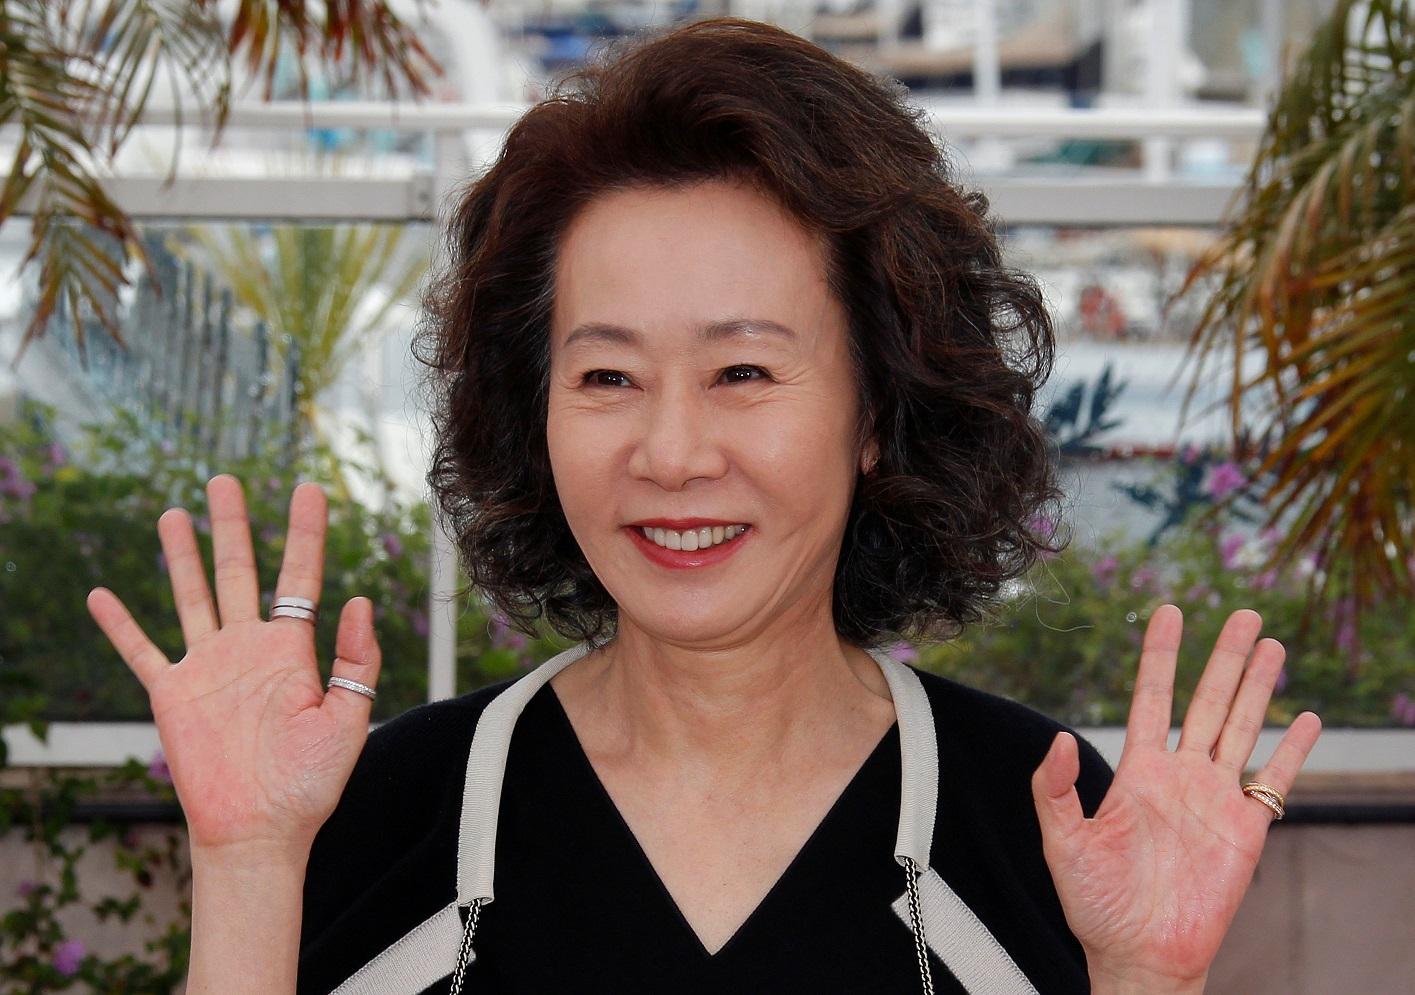 70 year old Korean lady finds  success